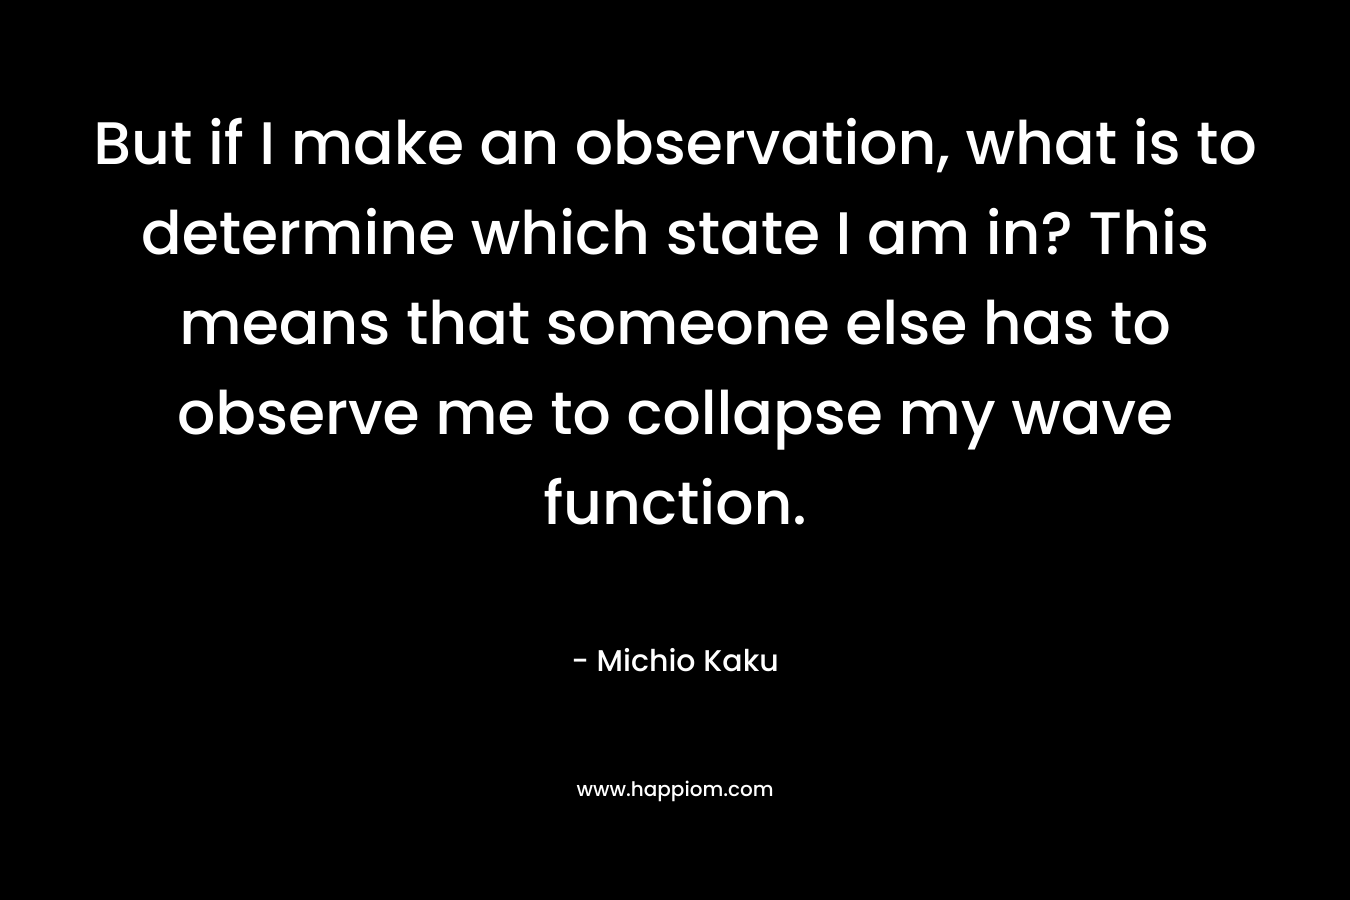 But if I make an observation, what is to determine which state I am in? This means that someone else has to observe me to collapse my wave function. – Michio Kaku